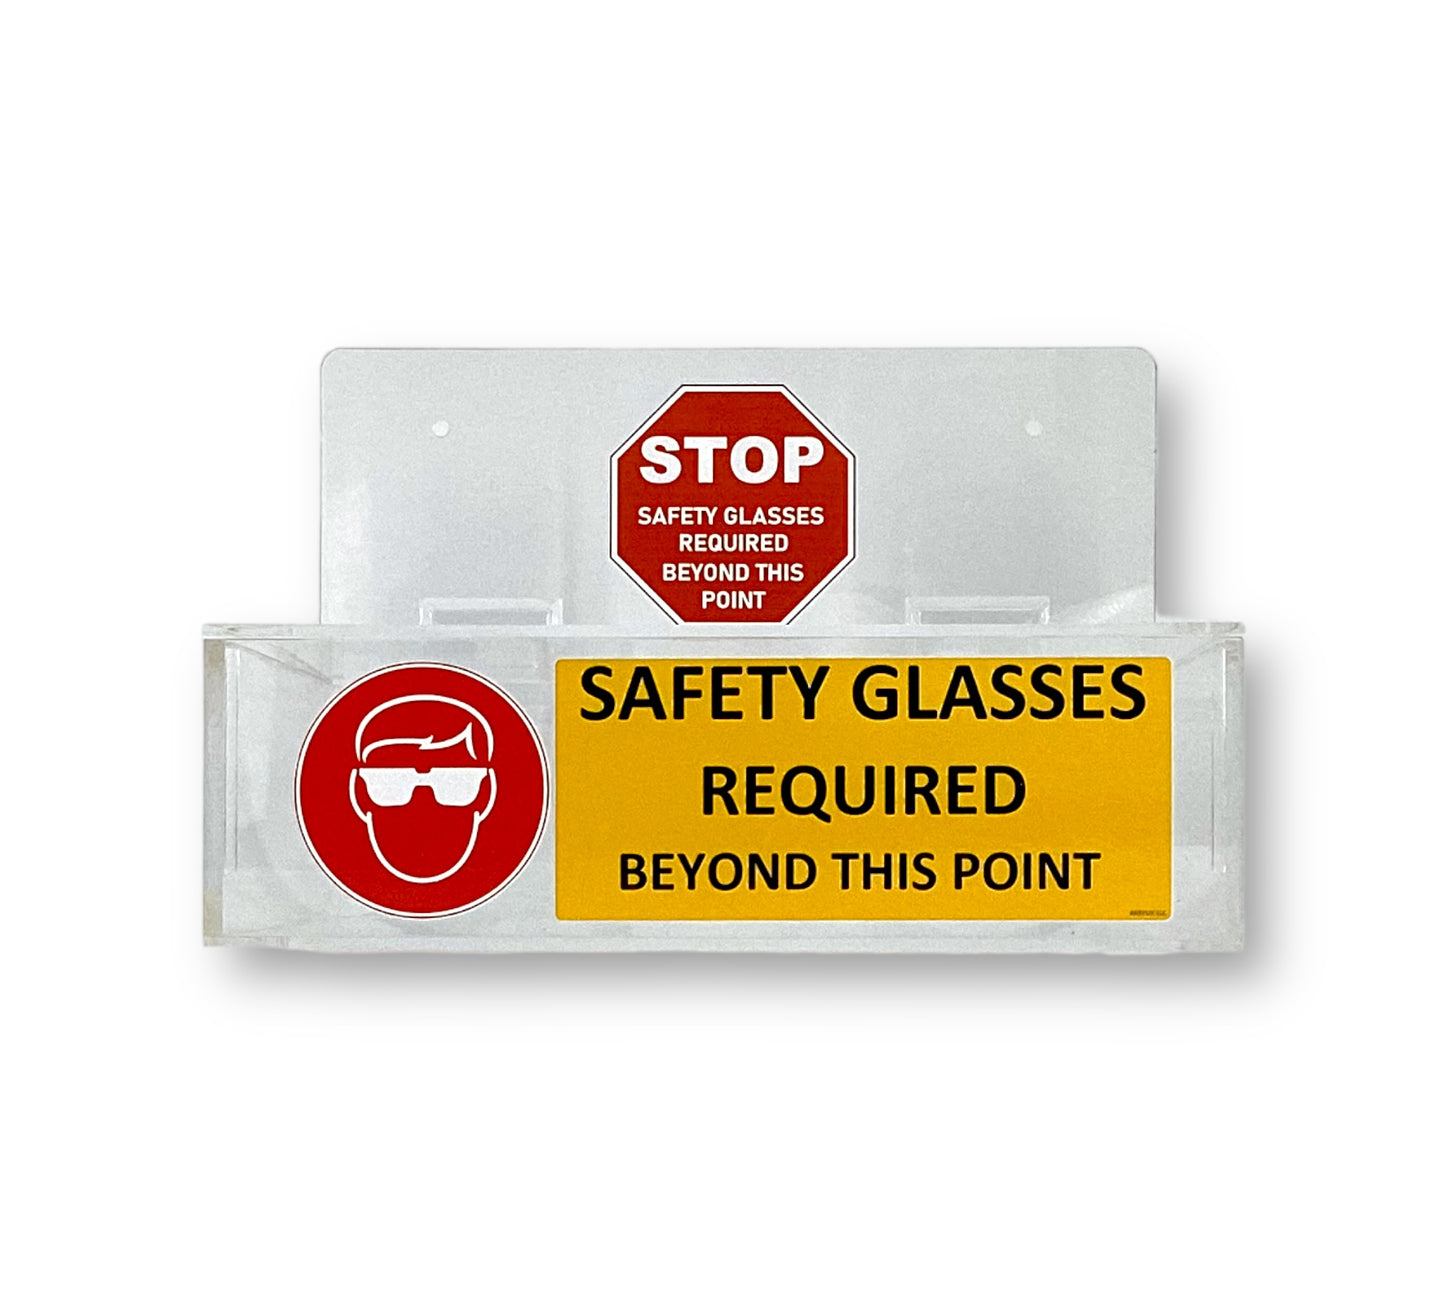 Clear Acrylic Wall Mountable Safety Glasses Dispenser w/ Hinged Lid - Red